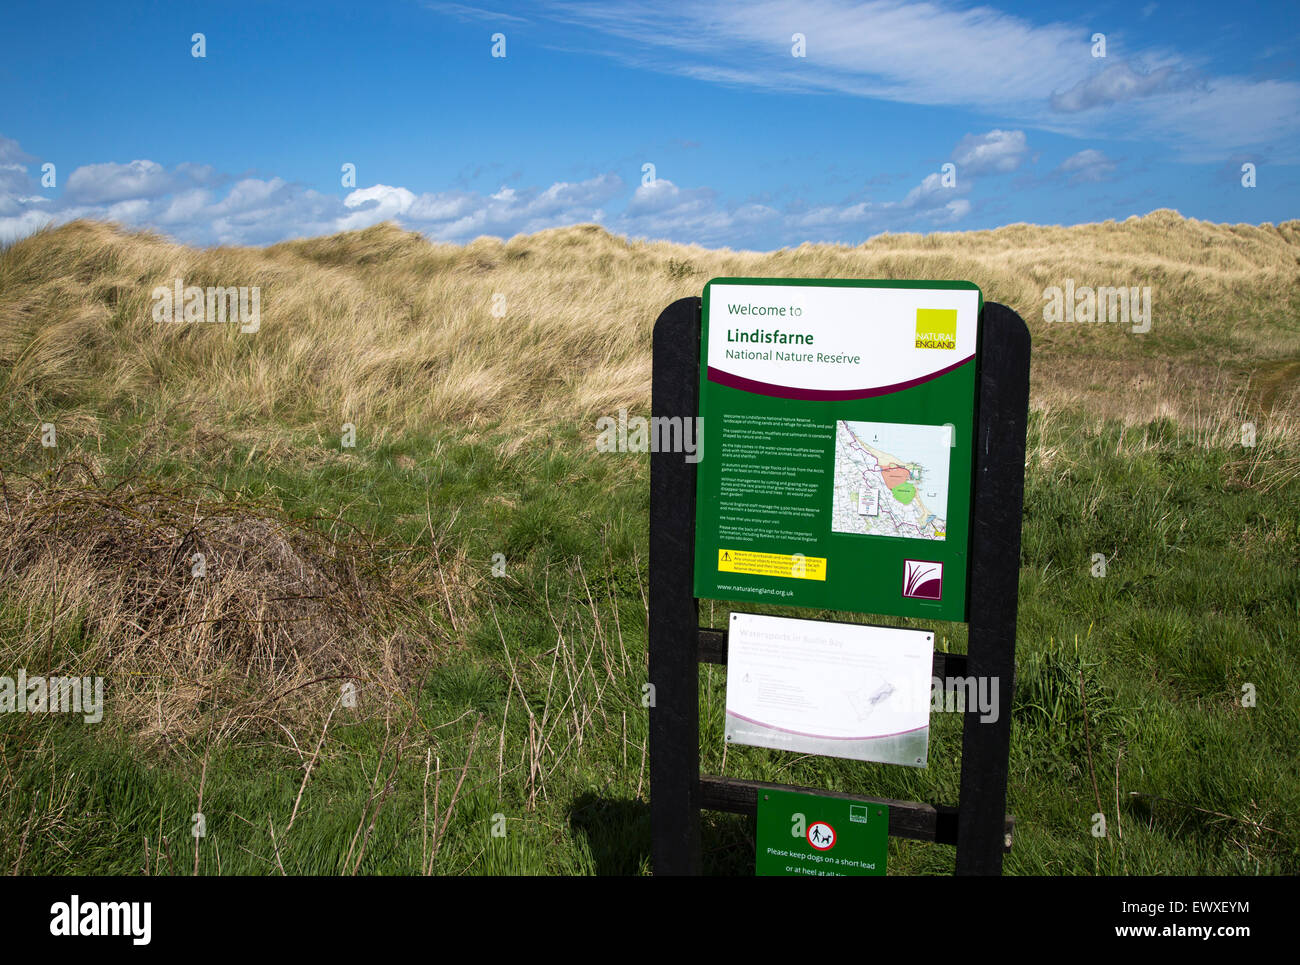 Sand dunes in Lindisfarne national nature reserve, Budle Bay Stock Photo -  Alamy